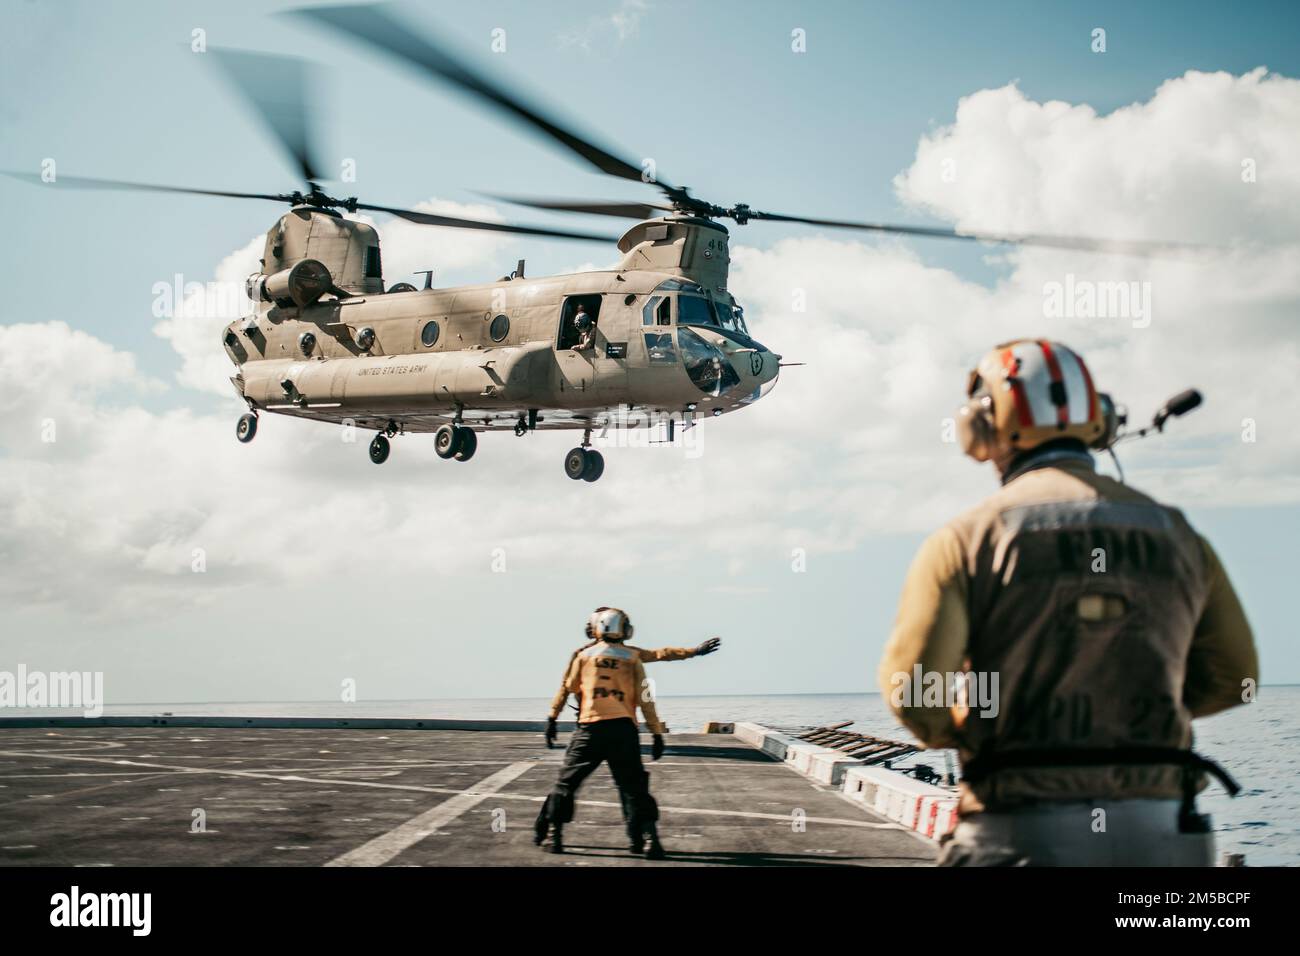 PACIFIC OCEAN (Feb. 18, 2022) U.S. Sailors assigned to amphibious transport dock USS Portland (LPD 27) signal to a U.S. Army CH-47F Chinook attached to 3rd Battalion, 25th Aviation Regiment, 25th Combat Aviation Brigade, while conducting deck landing qualifications, Feb. 18. Marines and Sailors of the 11th Marine Expeditionary Unit and Essex Amphibious Ready Group are underway conducting routine operations in U.S. 3rd Fleet. Stock Photo